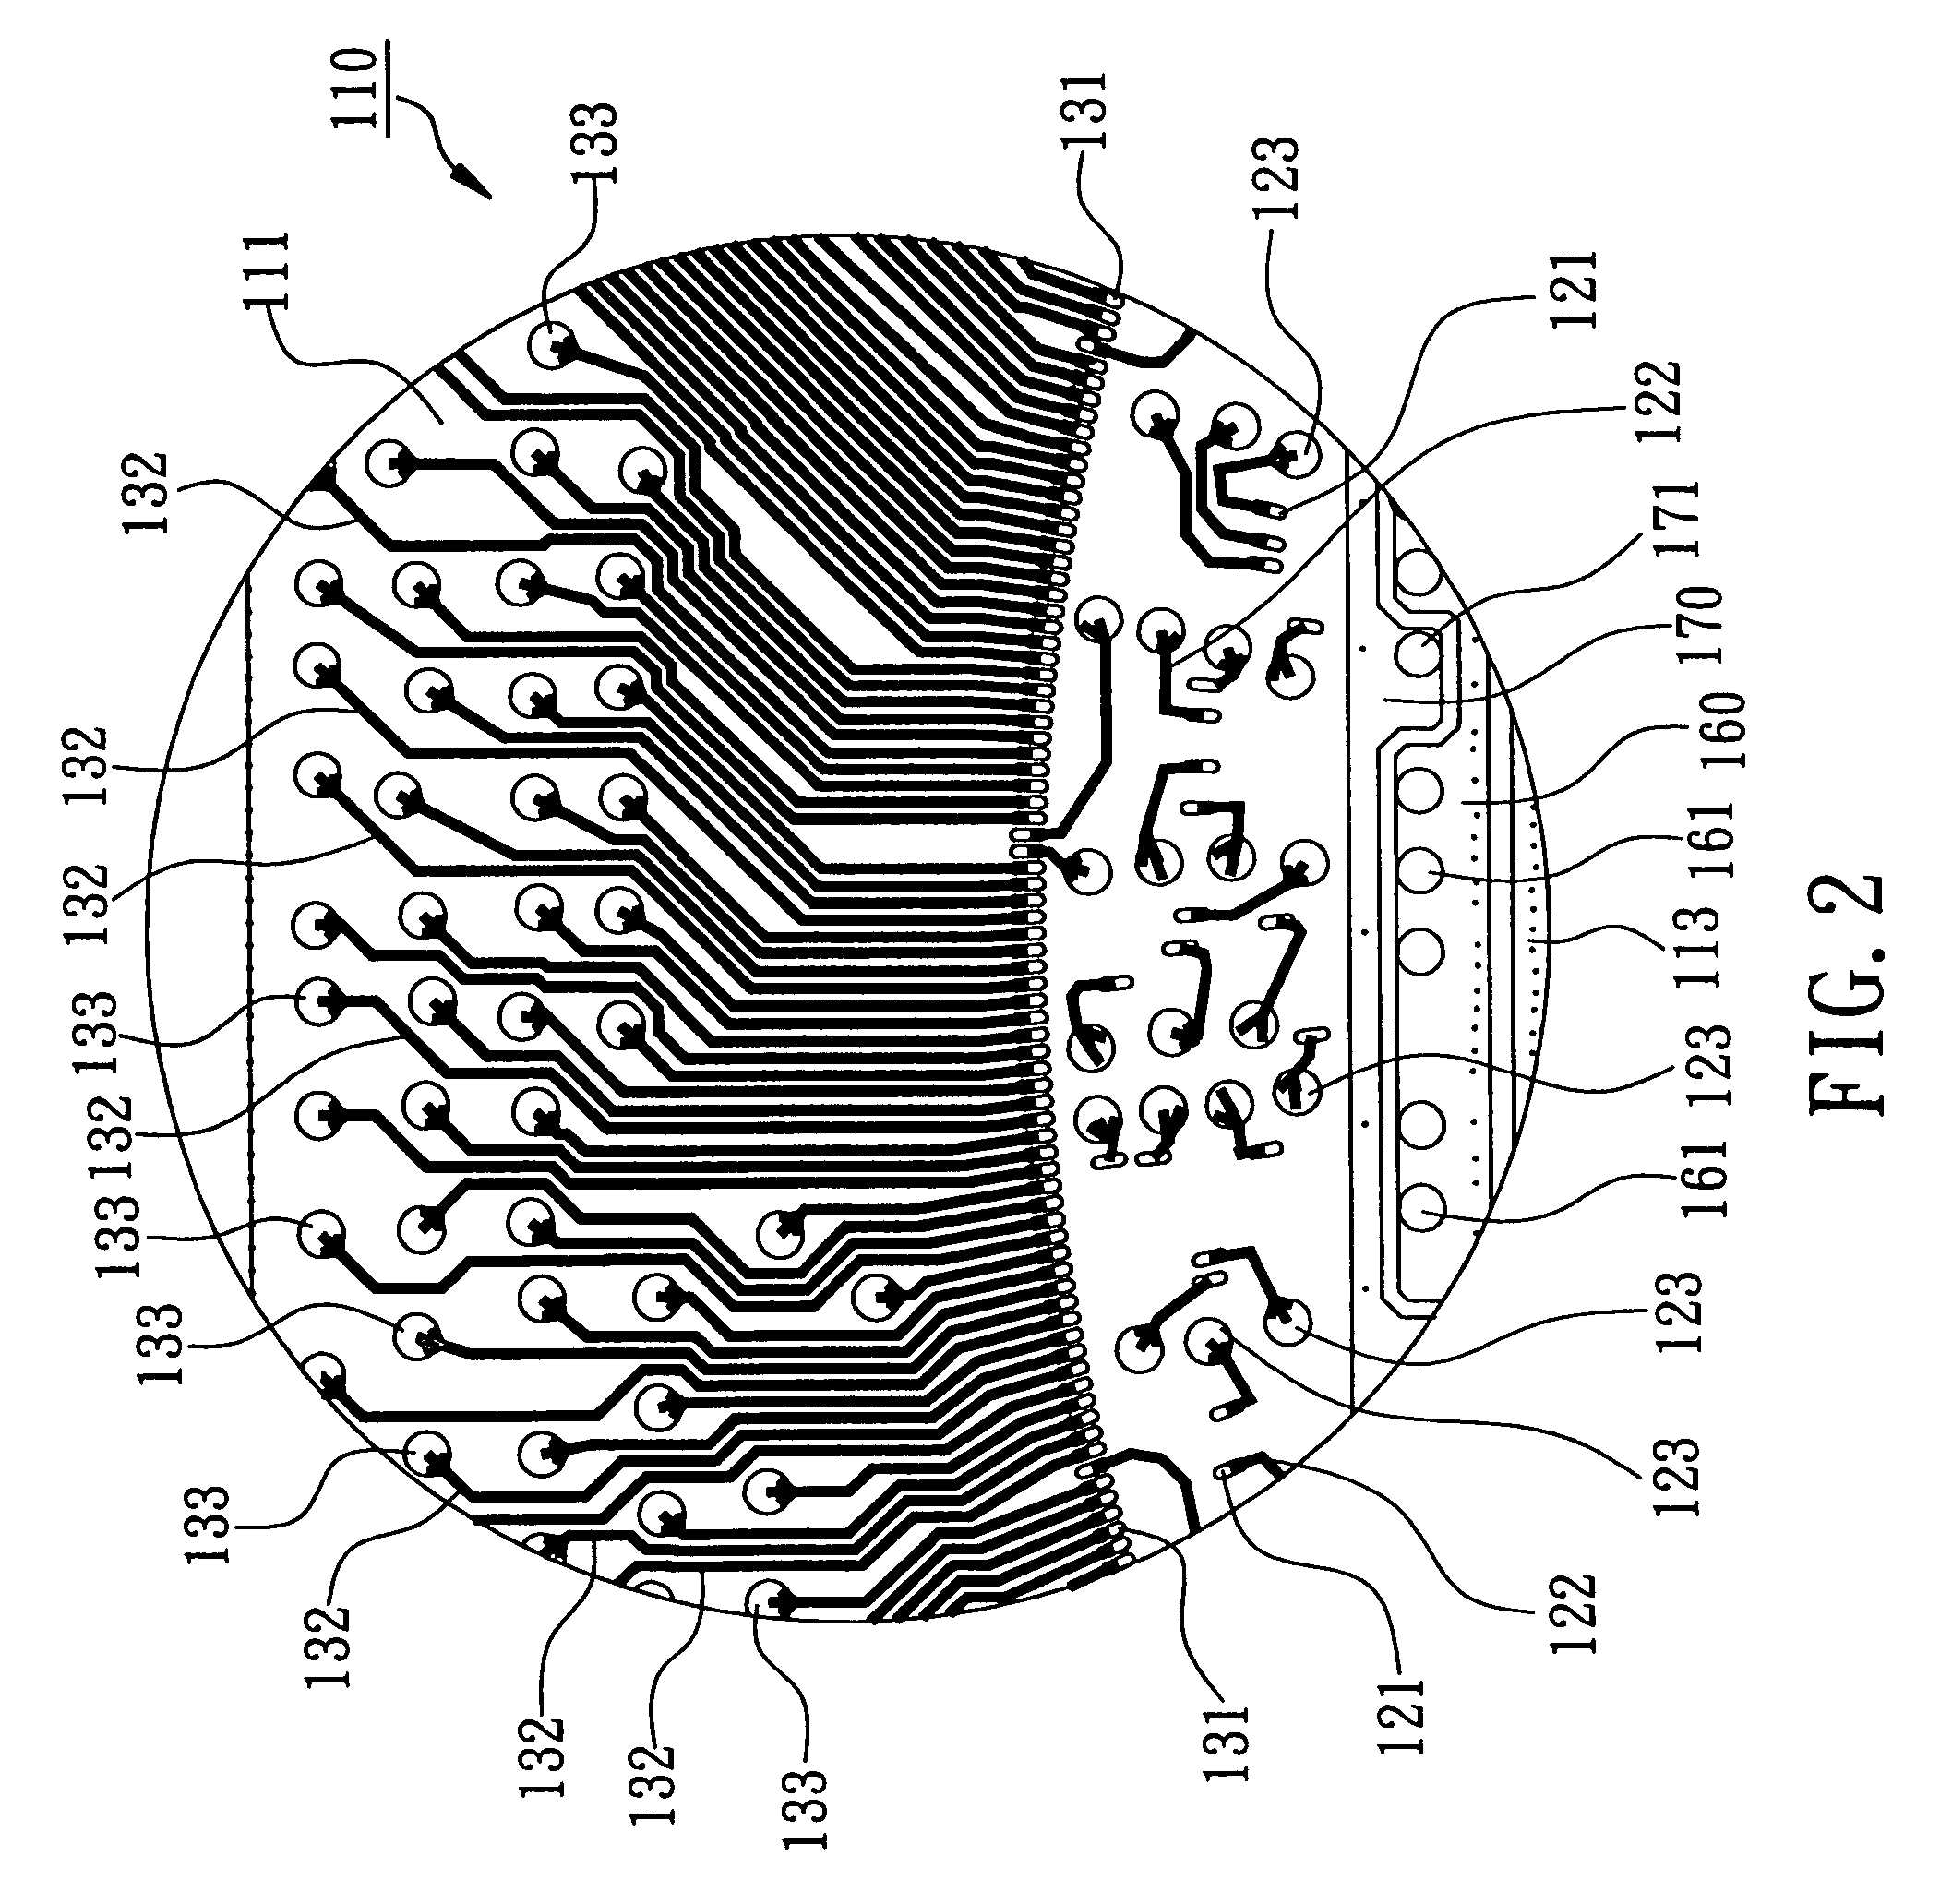 Package substrate for improving electrical performance